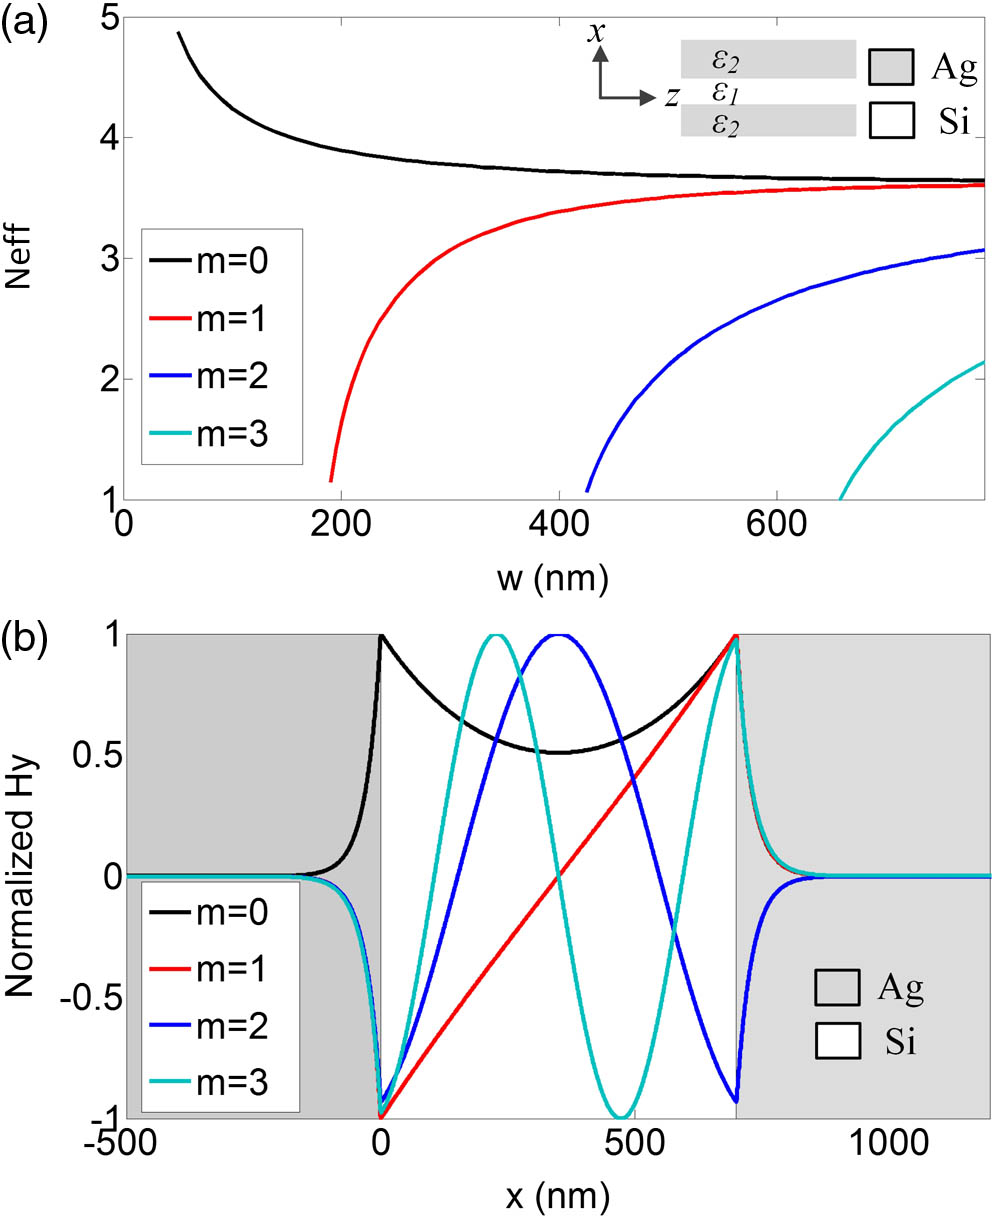 (a) Dispersion relation of MIM waveguide. (b) The field profile (Hy) of the first four TM modes in a 700 nm wide waveguide.